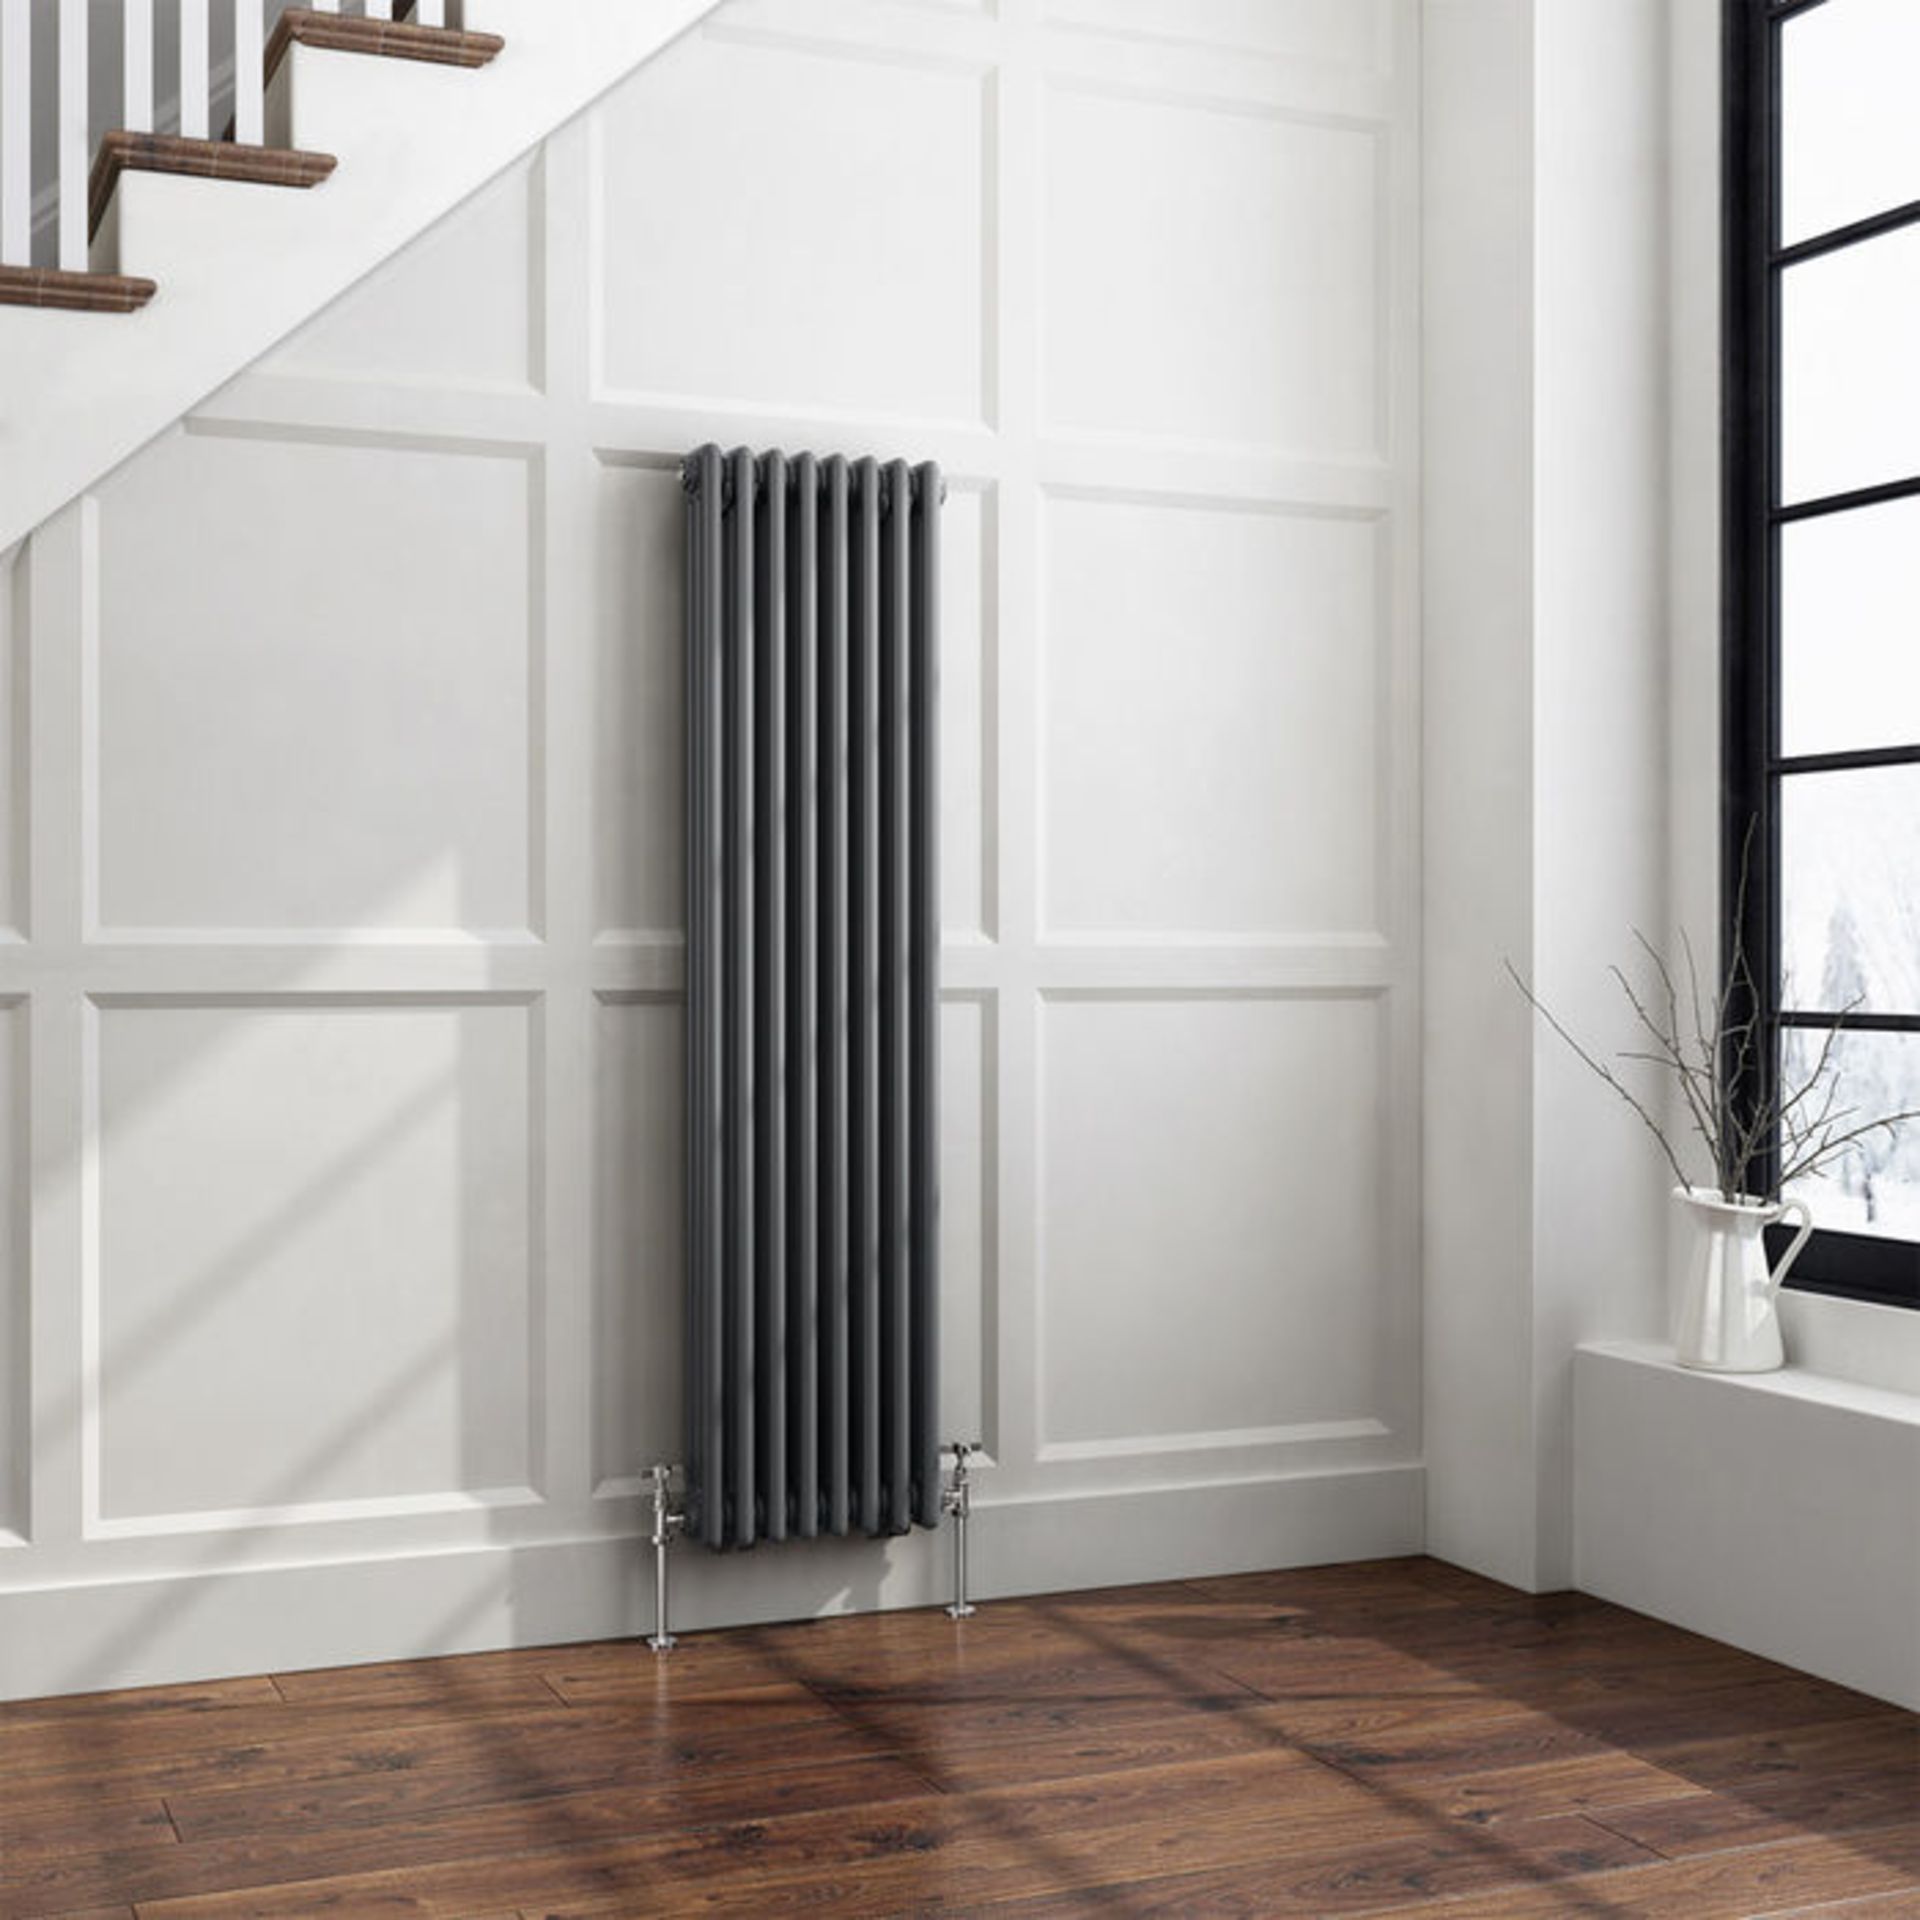 (TA181) 1500x380mm Anthracite Triple Panel Vertical Colosseum Traditional Radiator. RRP £399.99. - Image 3 of 4